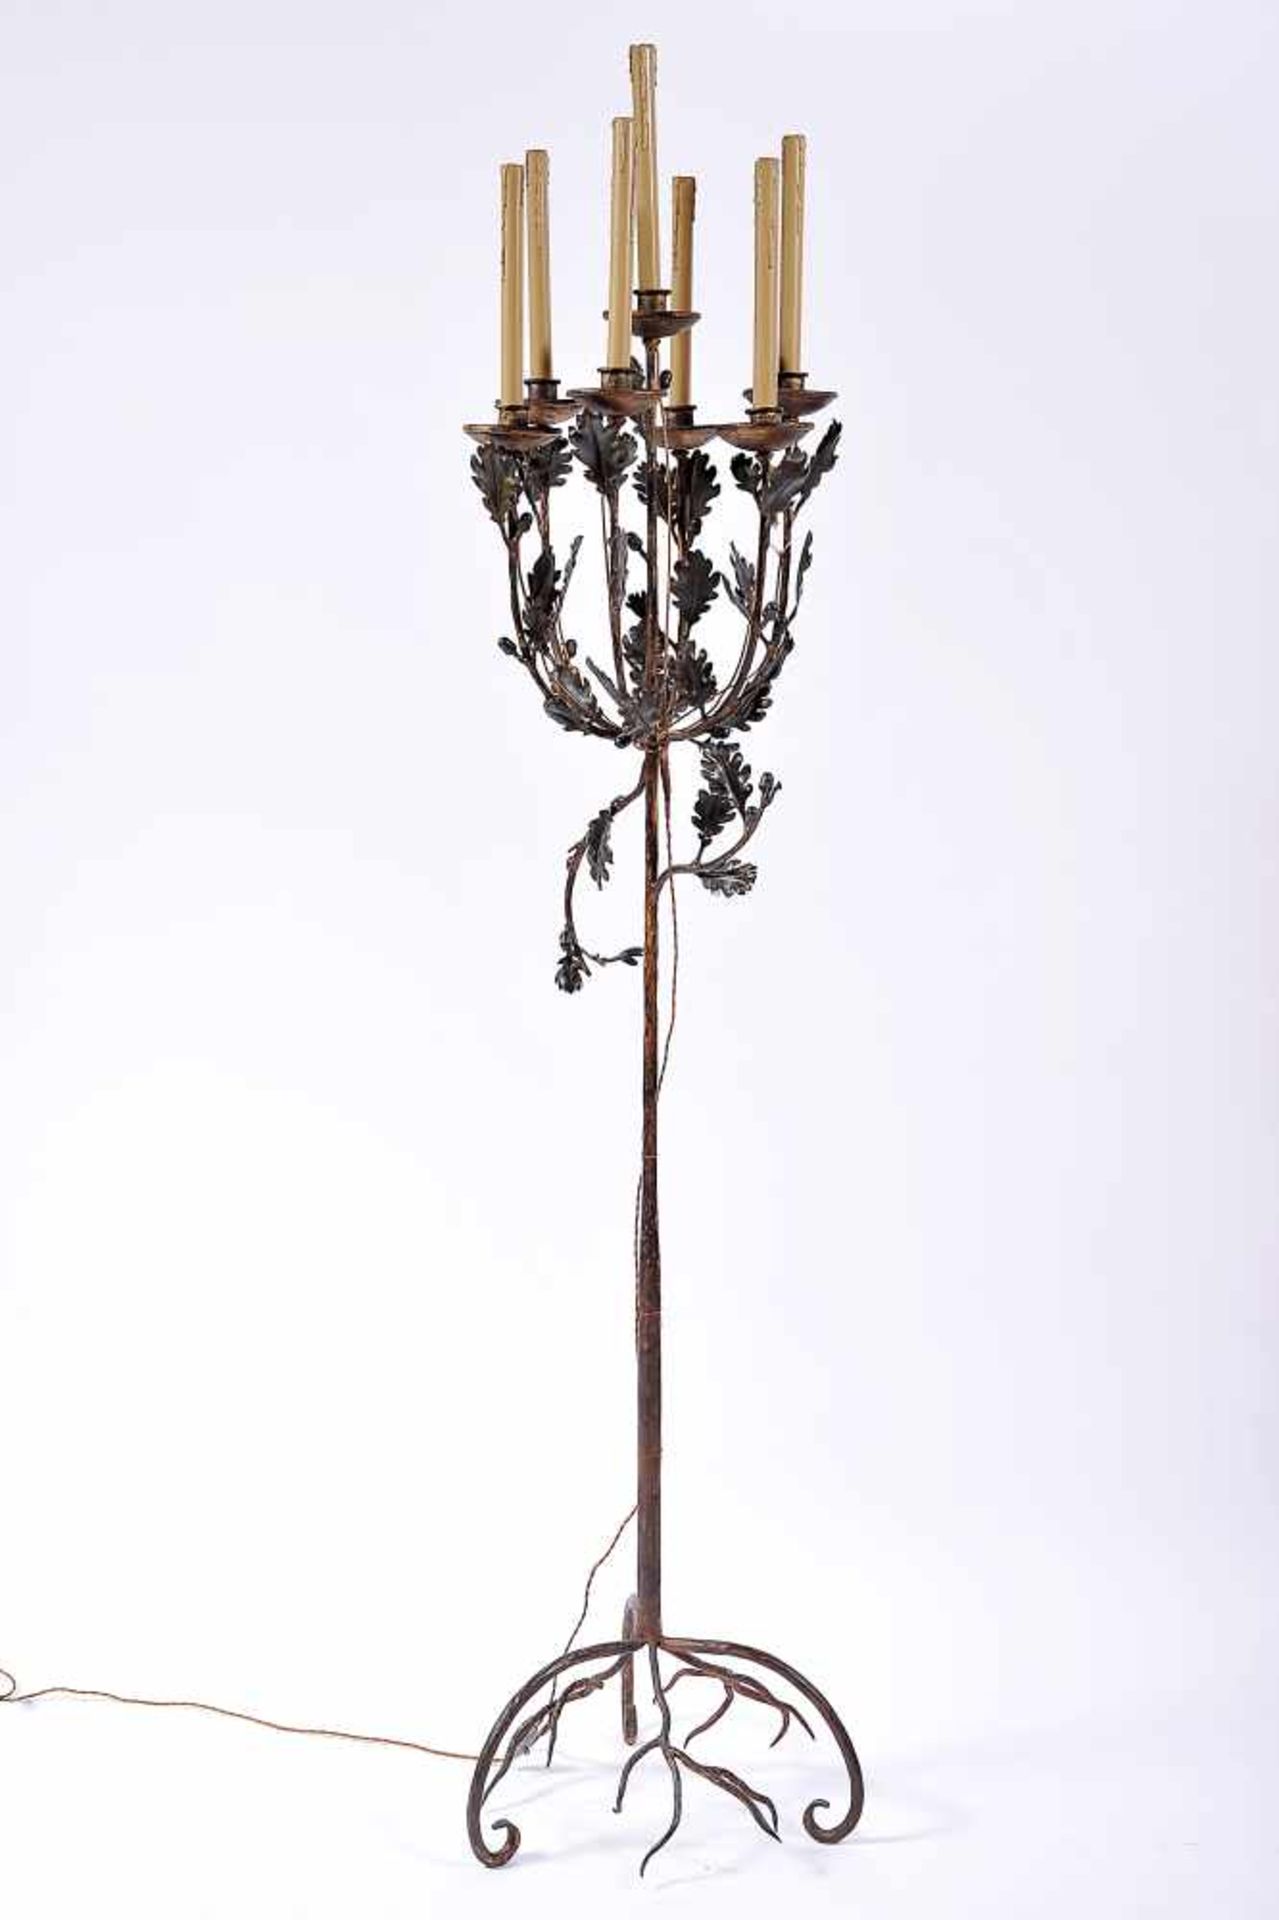 A Seven-light Floor Lamp, iron, scalloped decoration "Oak leaves and acorns", European, 19th/20th